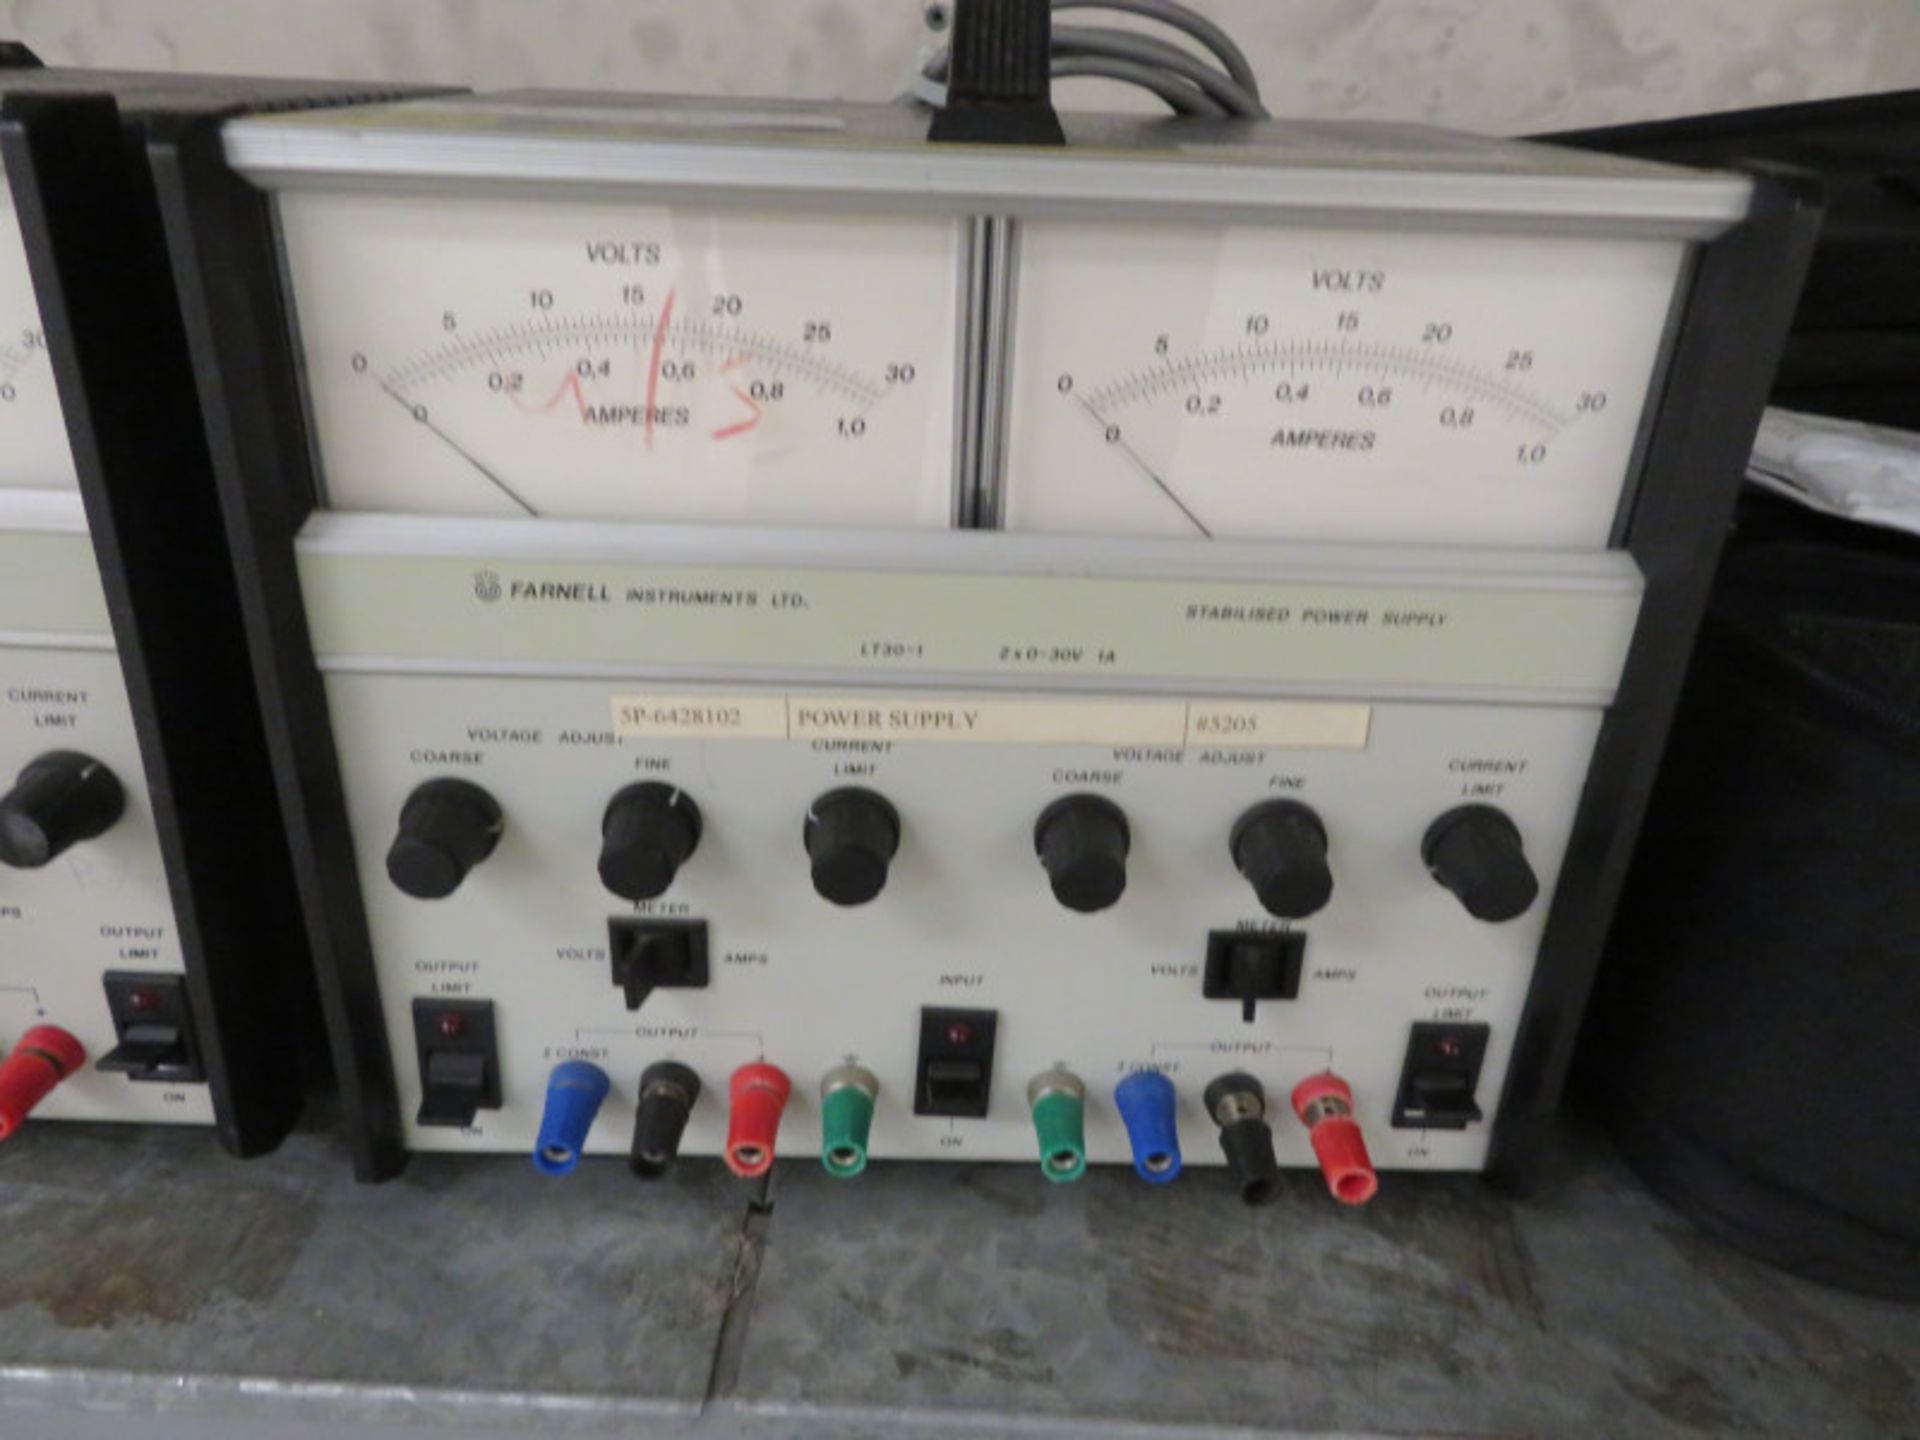 Farnell Instruments LT30-1 Stabilised Power Supply - 2x 0-30v 1A - Image 2 of 3